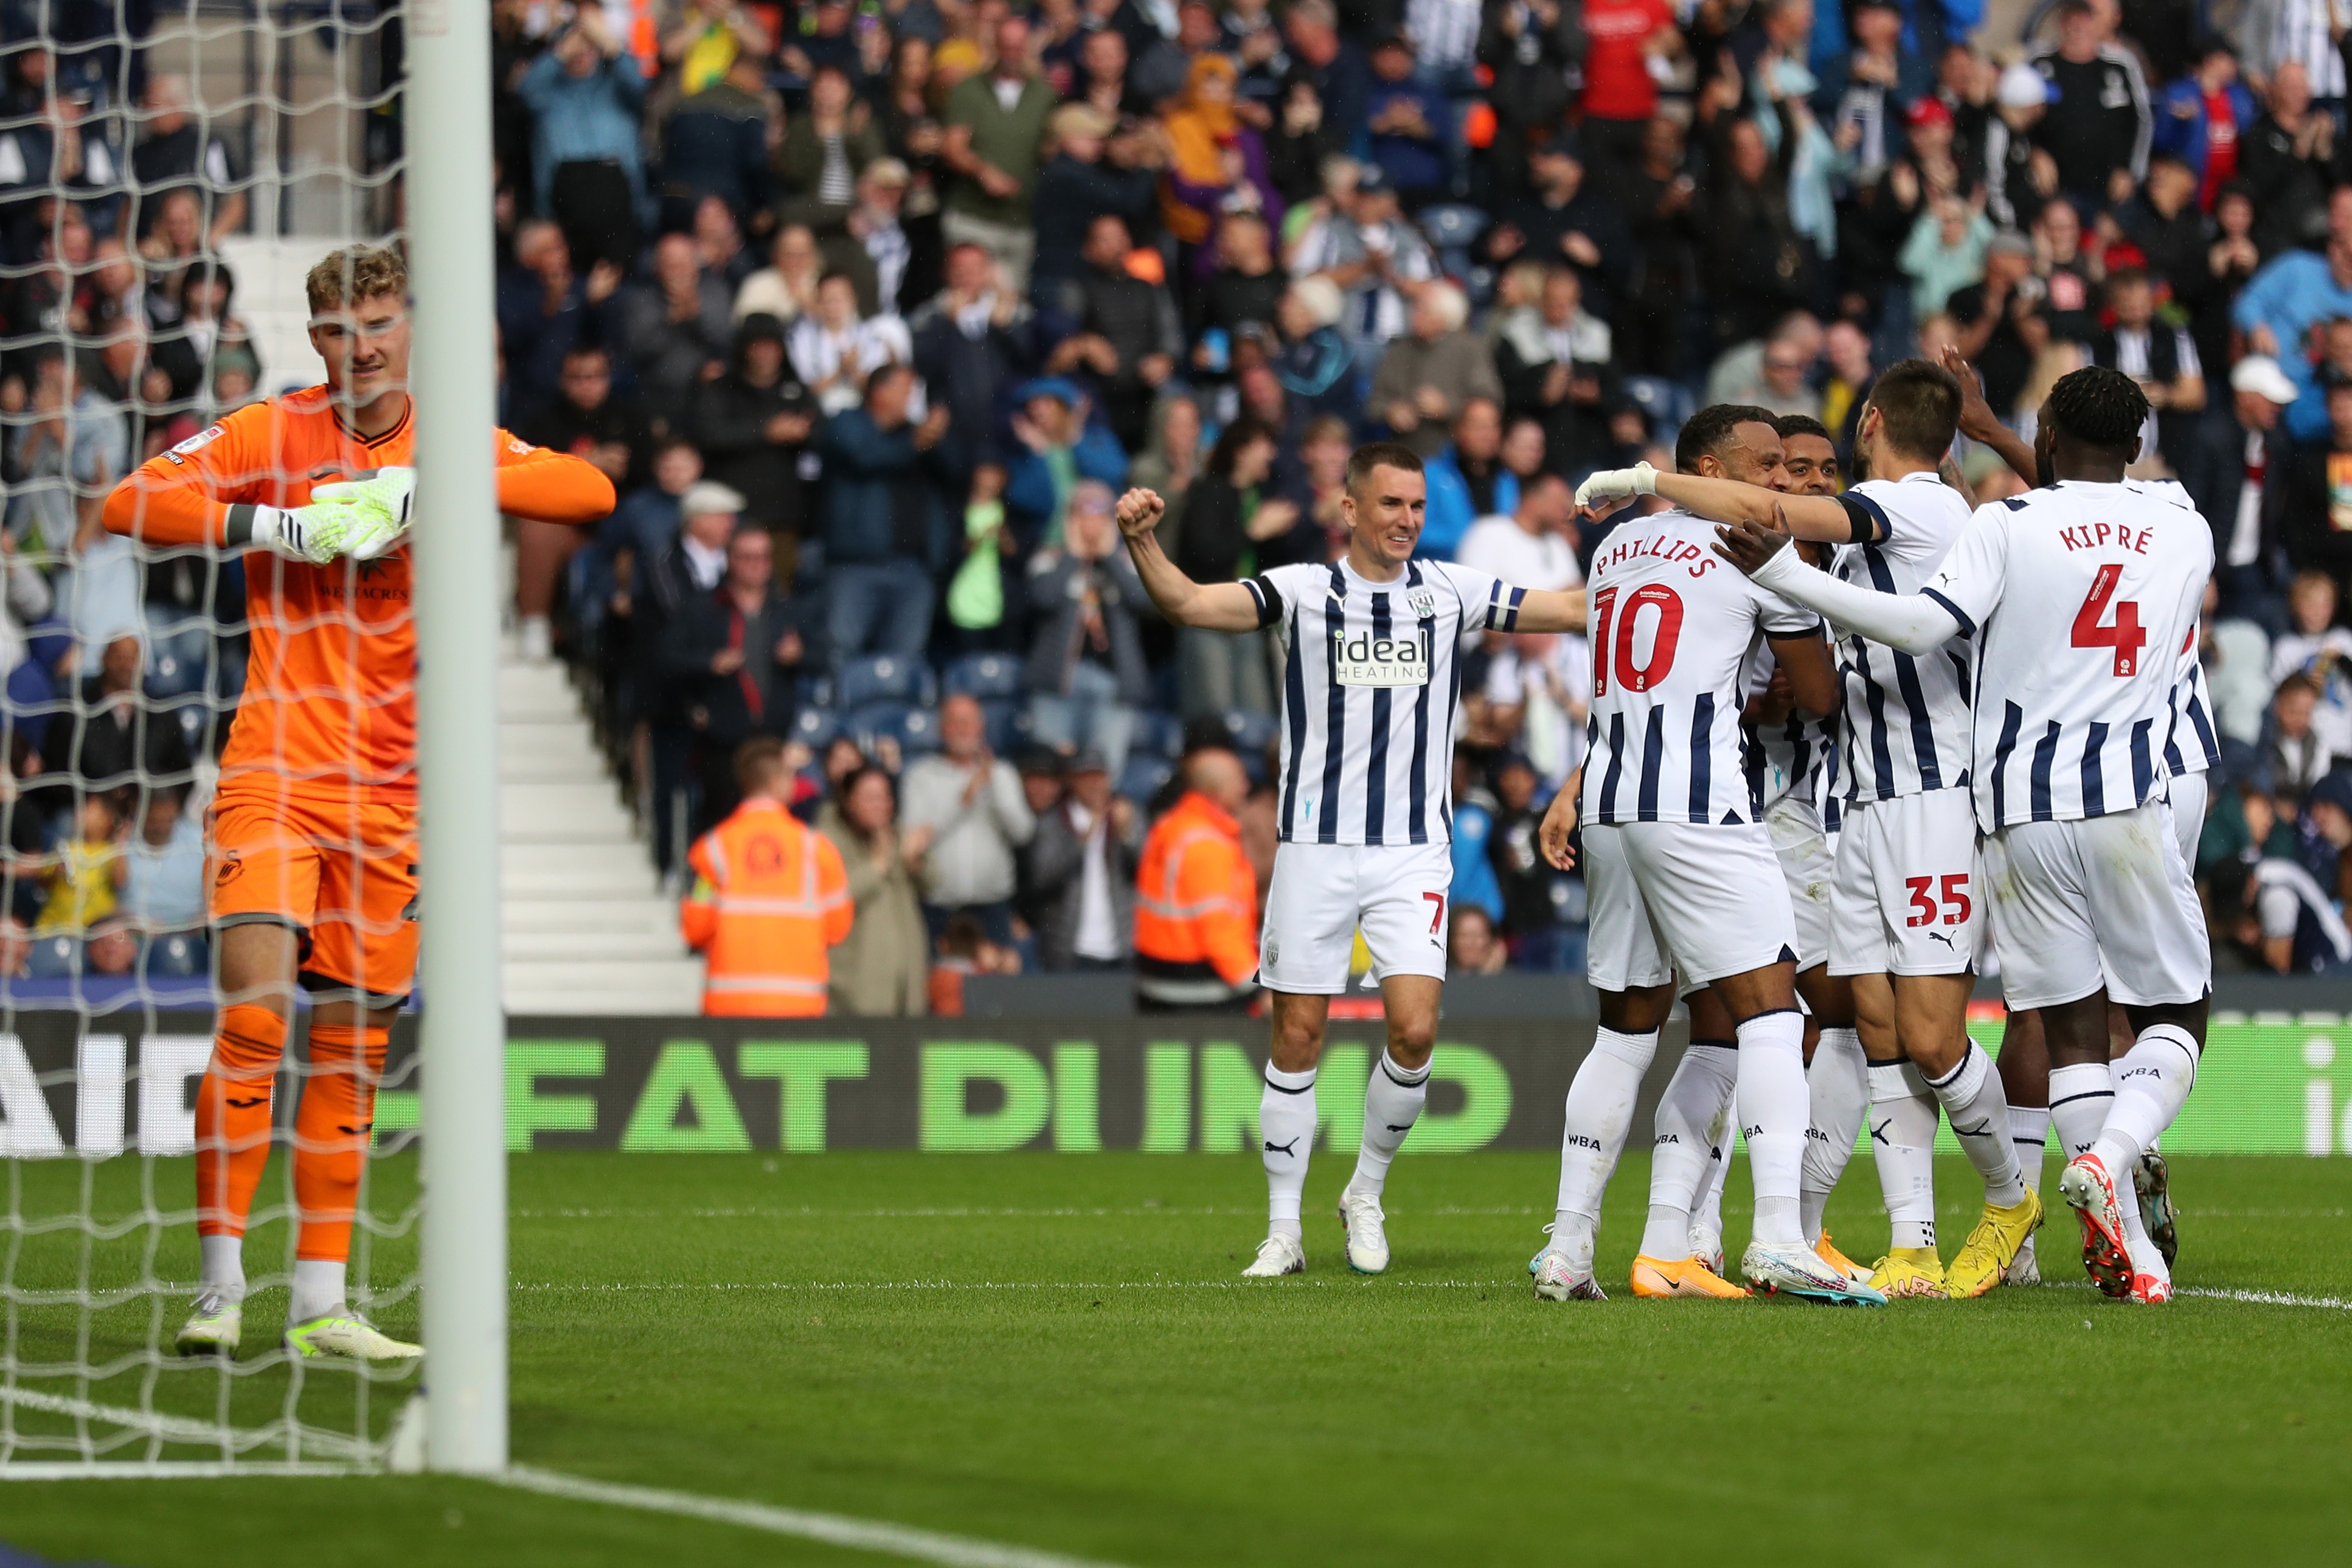 Albion players celebrate their second goal against Swansea 